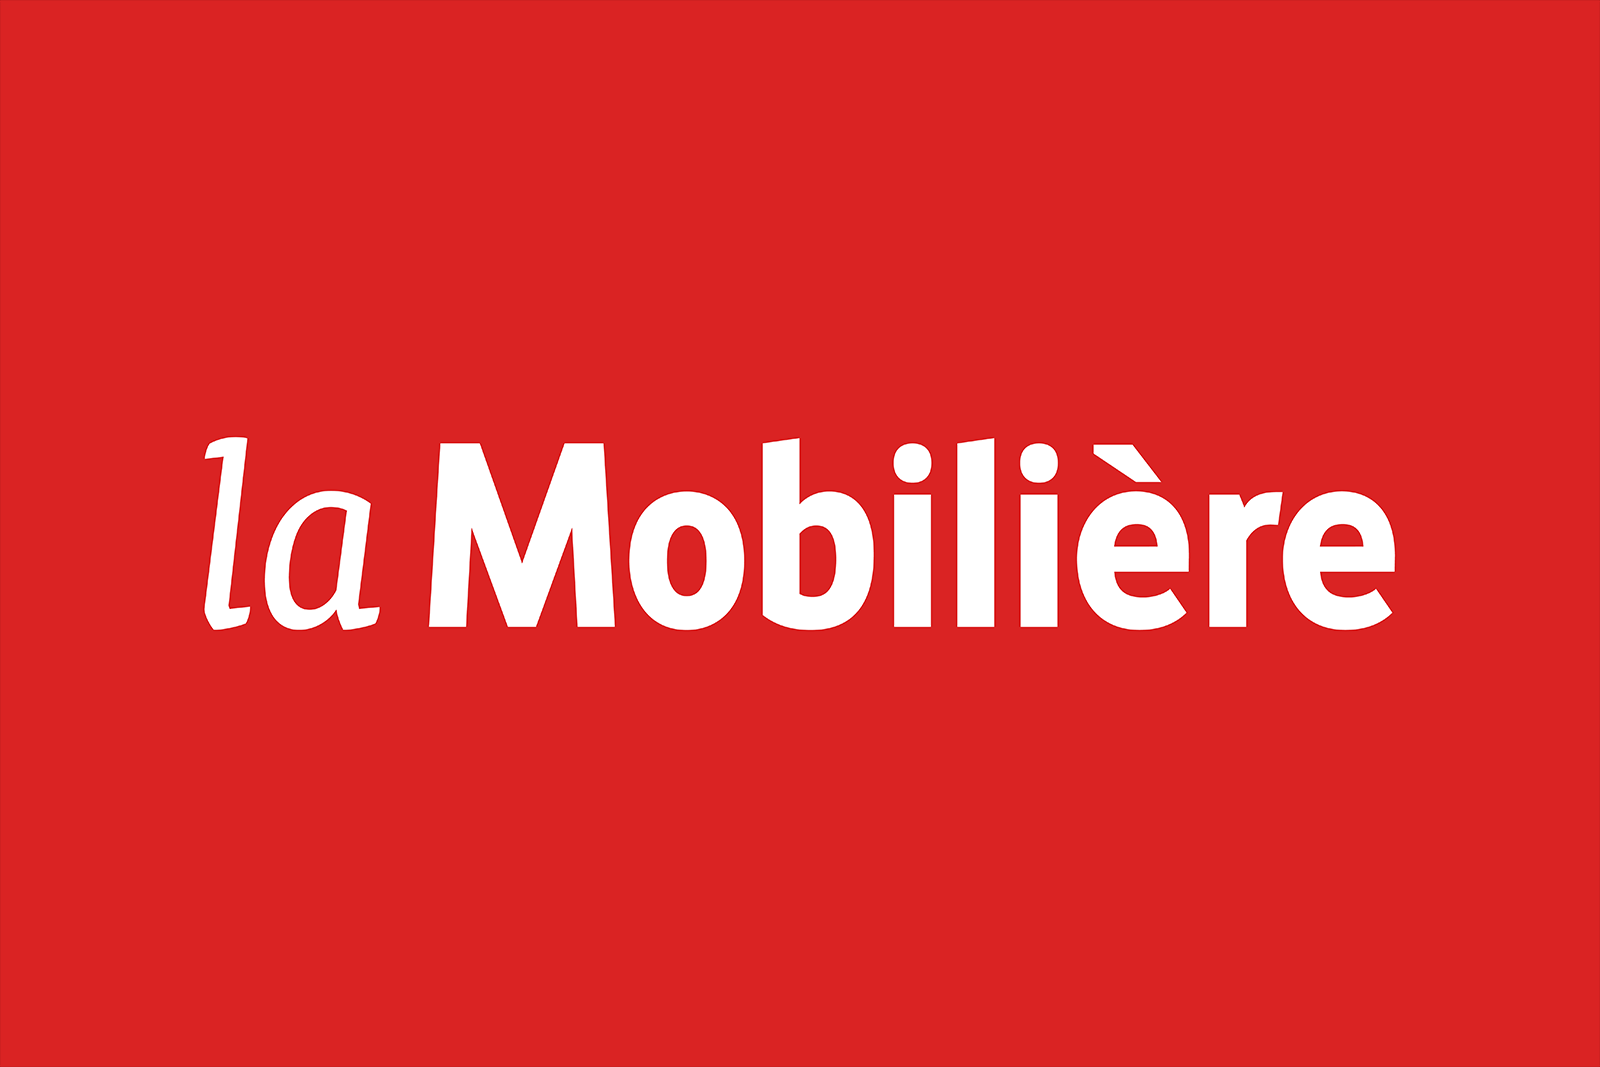 mobiliere-suisse